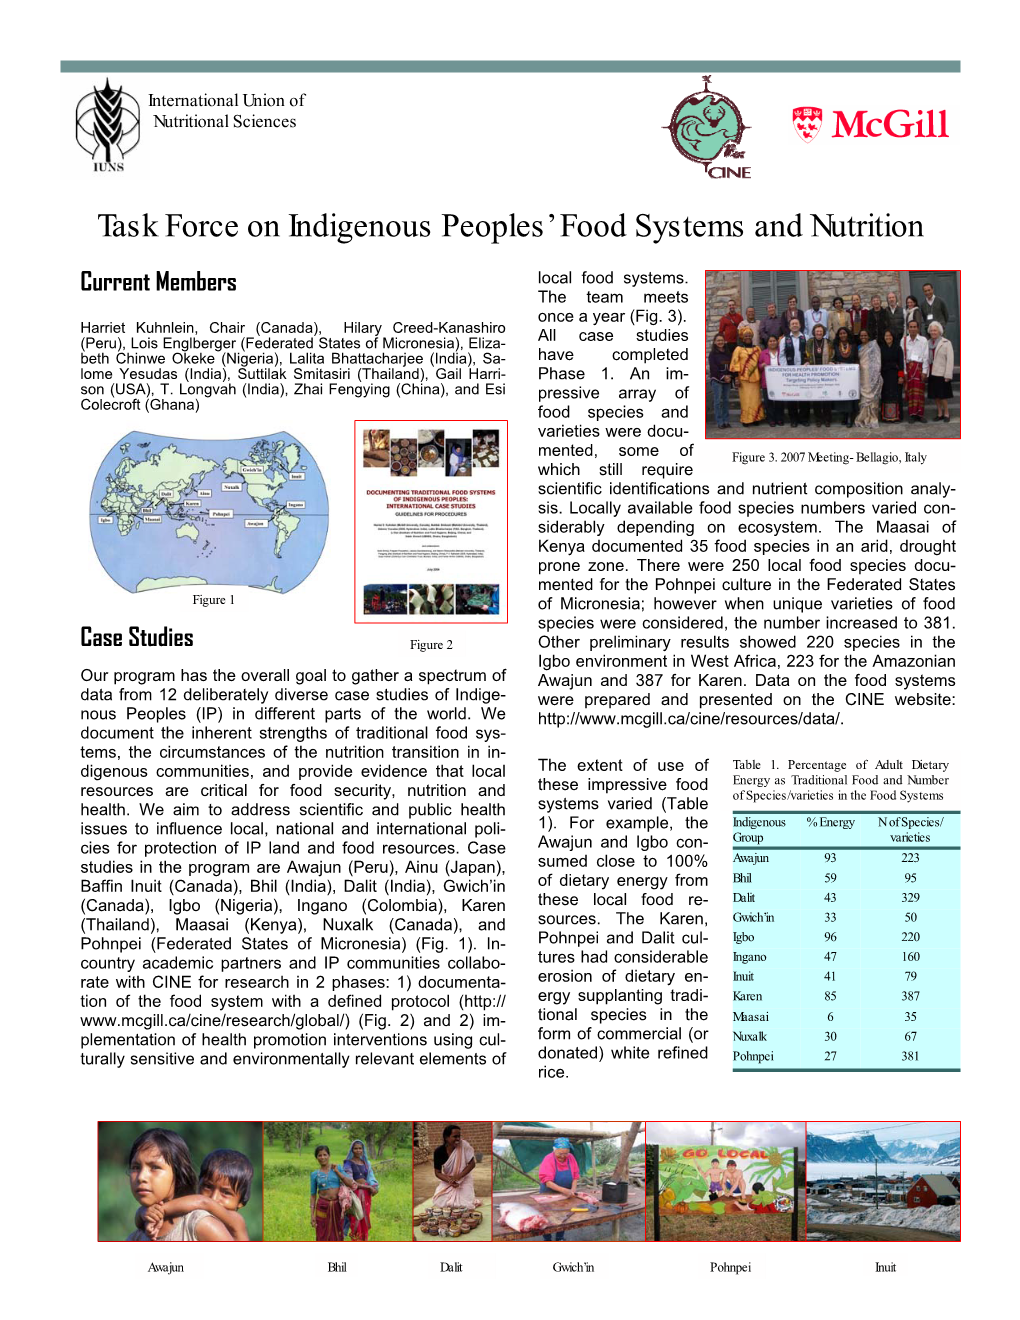 IUNS Task Force on Indigenous Peoples' Food Systems